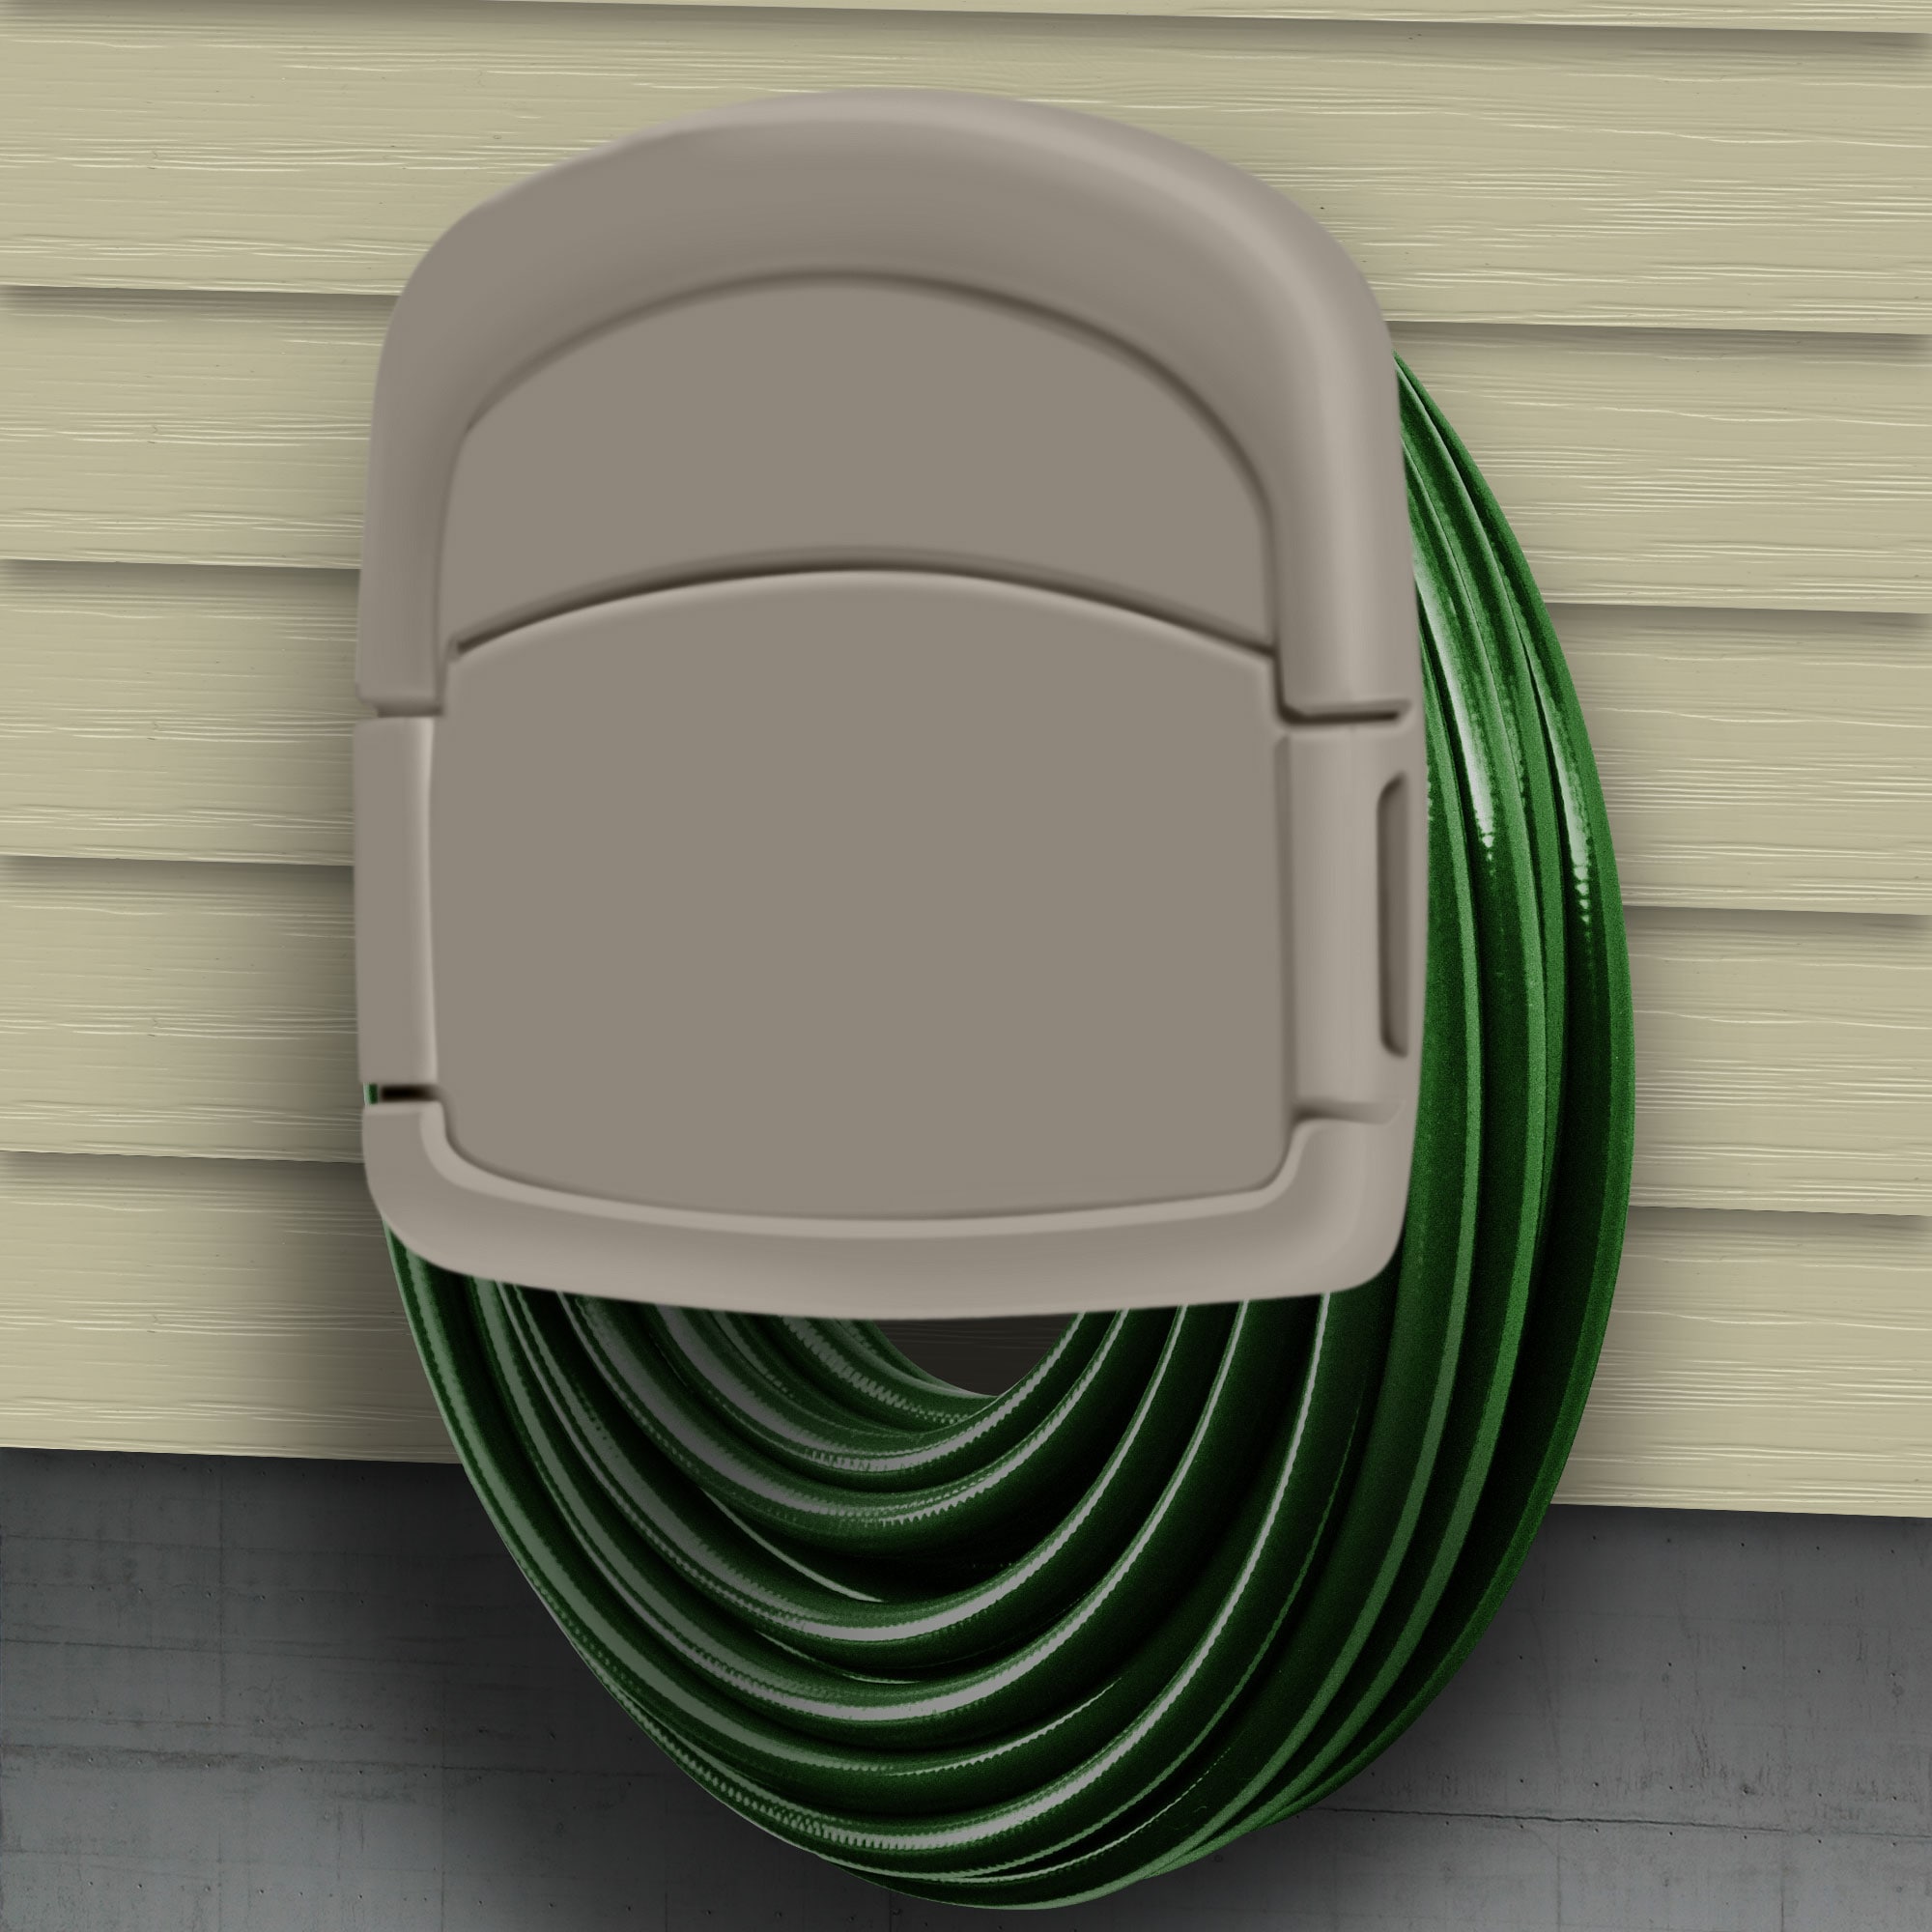 GARDEN HOSE PIPE HANGER WALL MOUNTED CABLE TIDY STORAGE SHED HOSE REEL  HOLDER UK 8719202558500